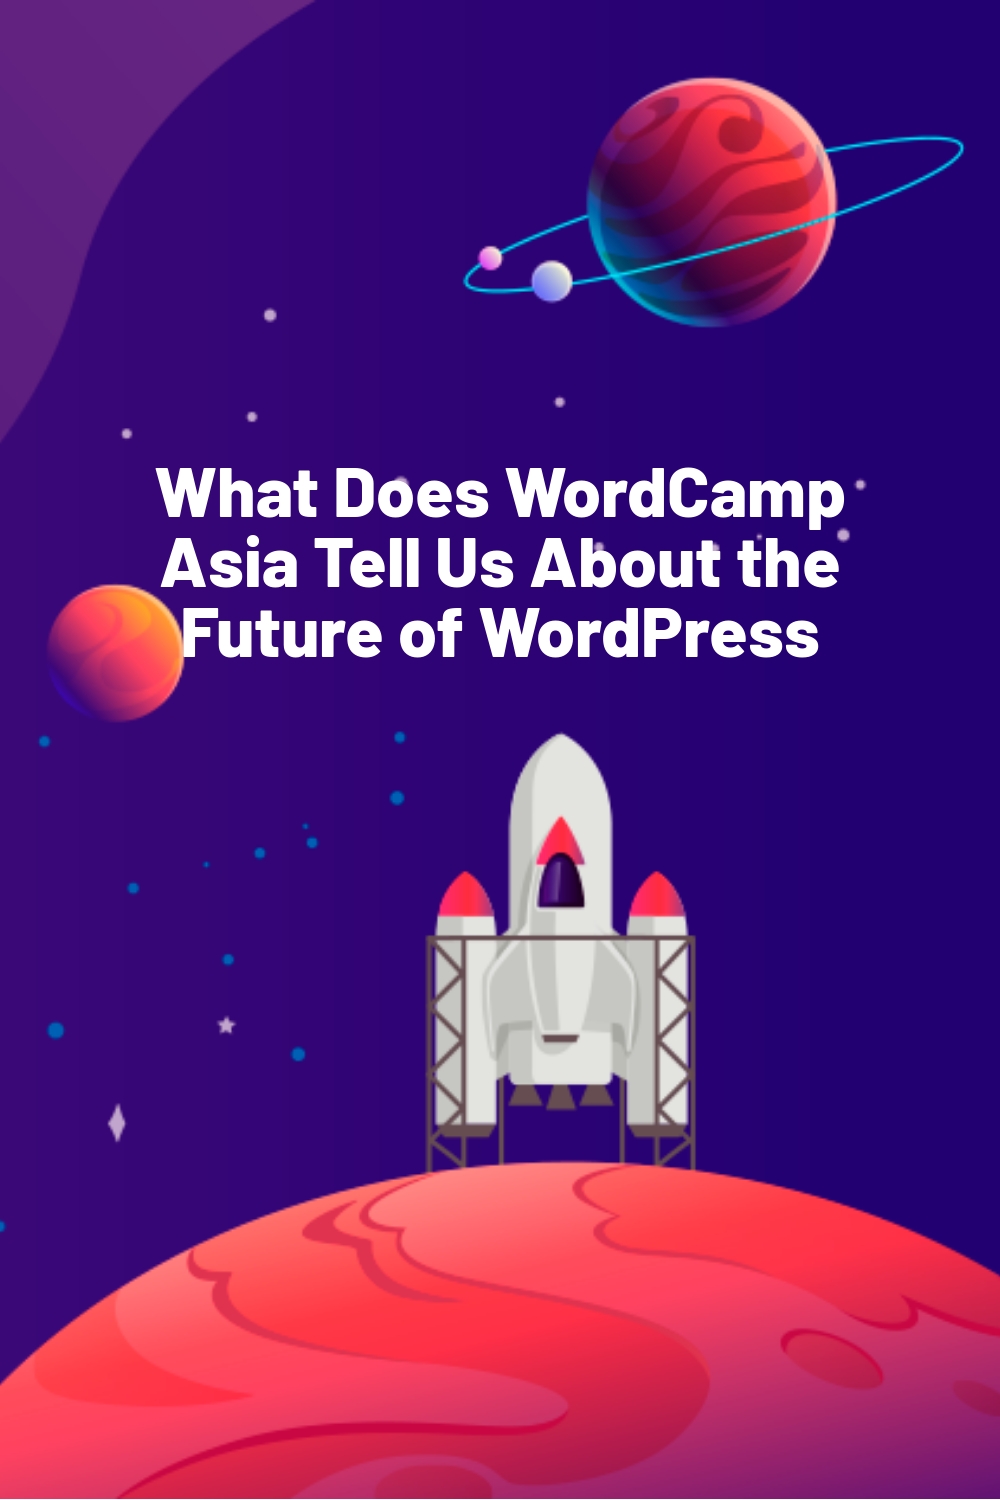 What Does WordCamp Asia Tell Us About the Future of WordPress